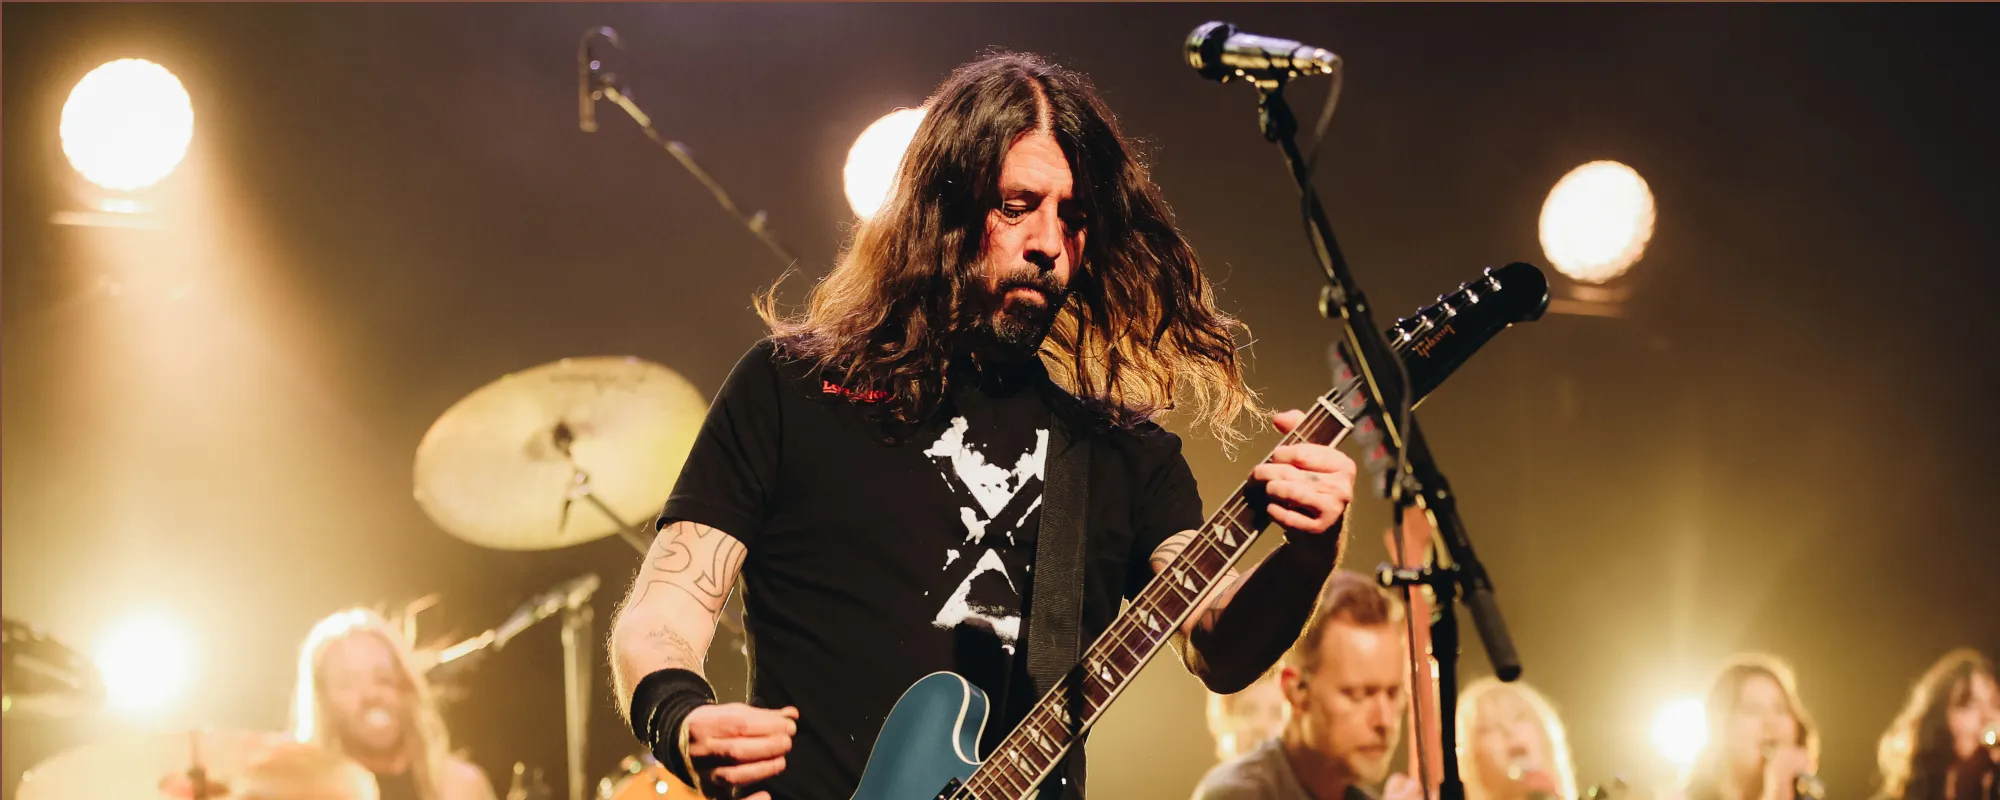 Foo Fighters Releasing New Album in June, Share Single “Rescued”